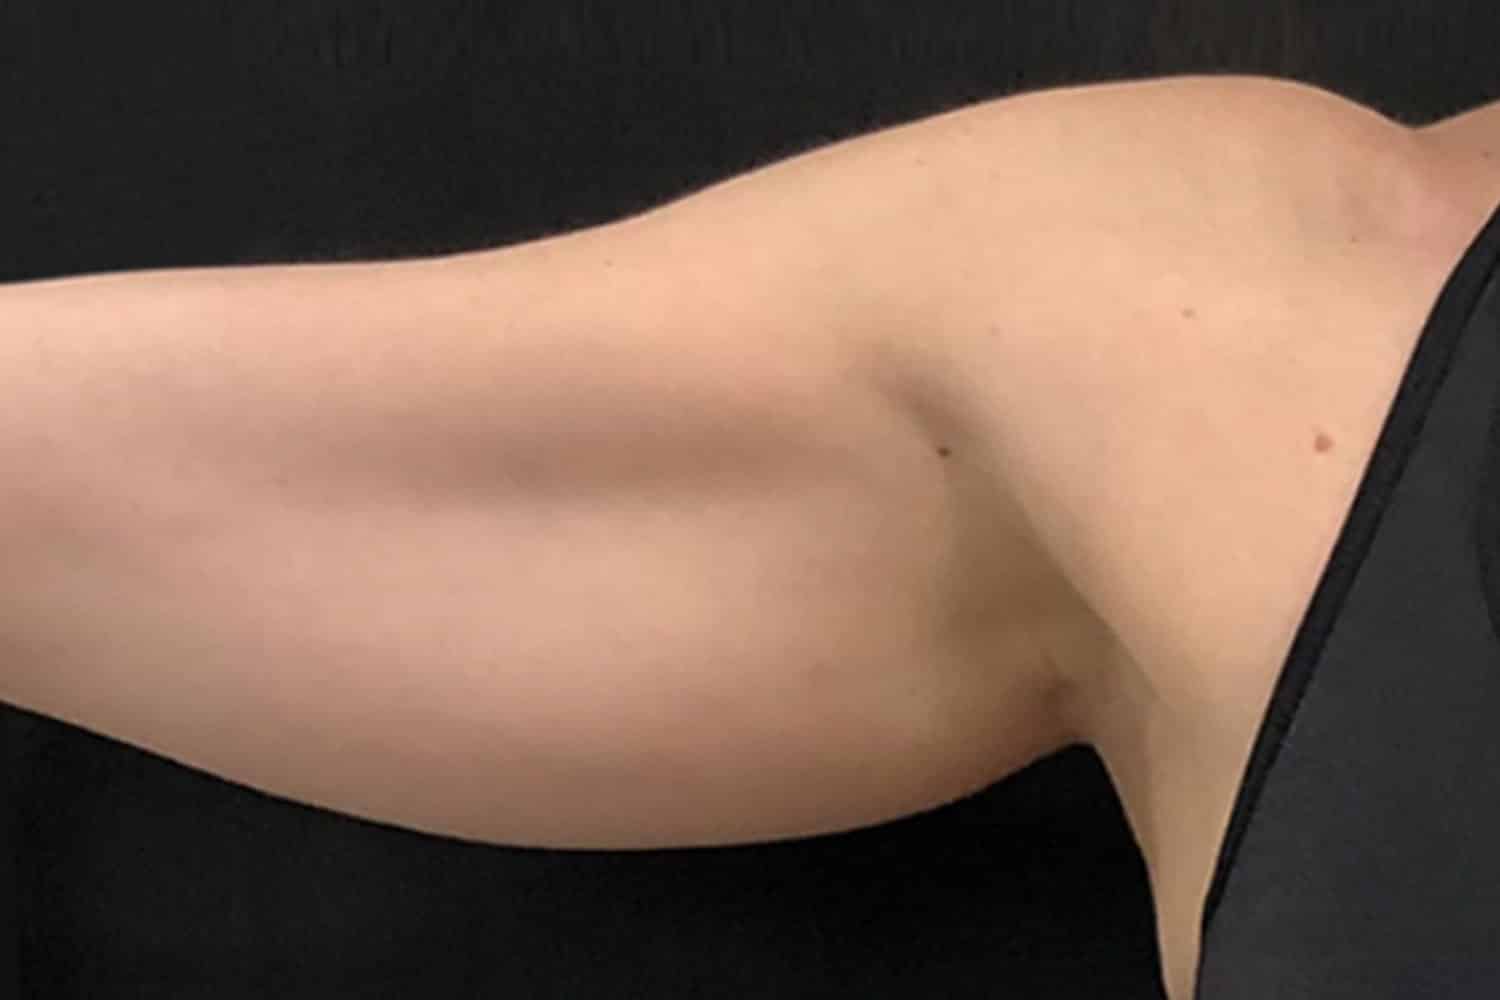 right arm with excess skin for Trusculpt procedure at Regeneris